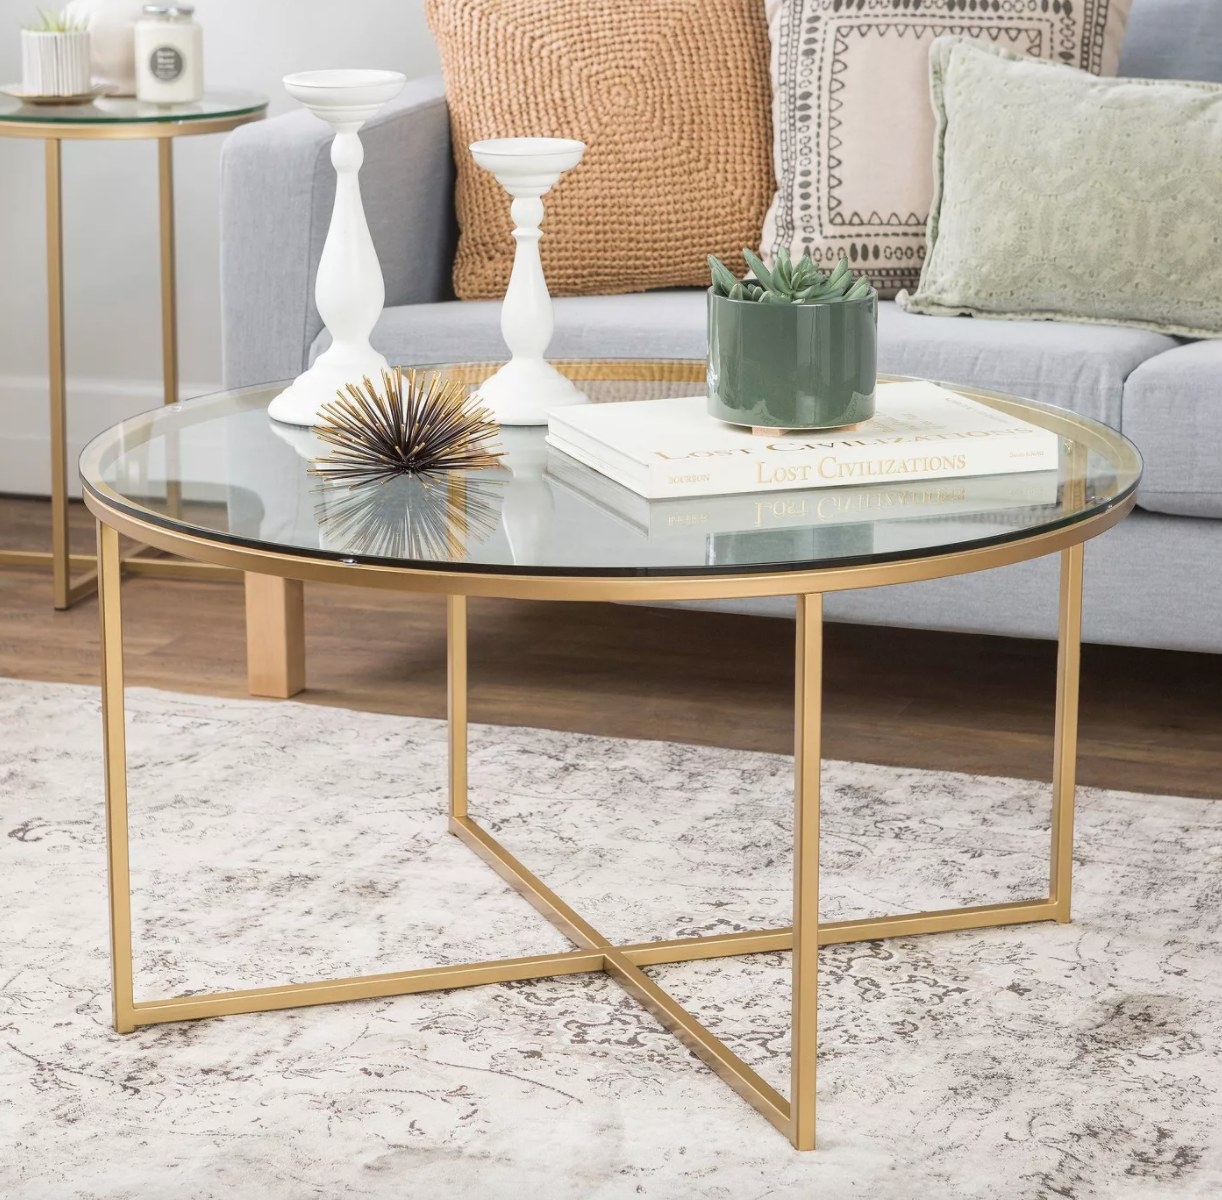 A round coffee table with metallic legs and glass top